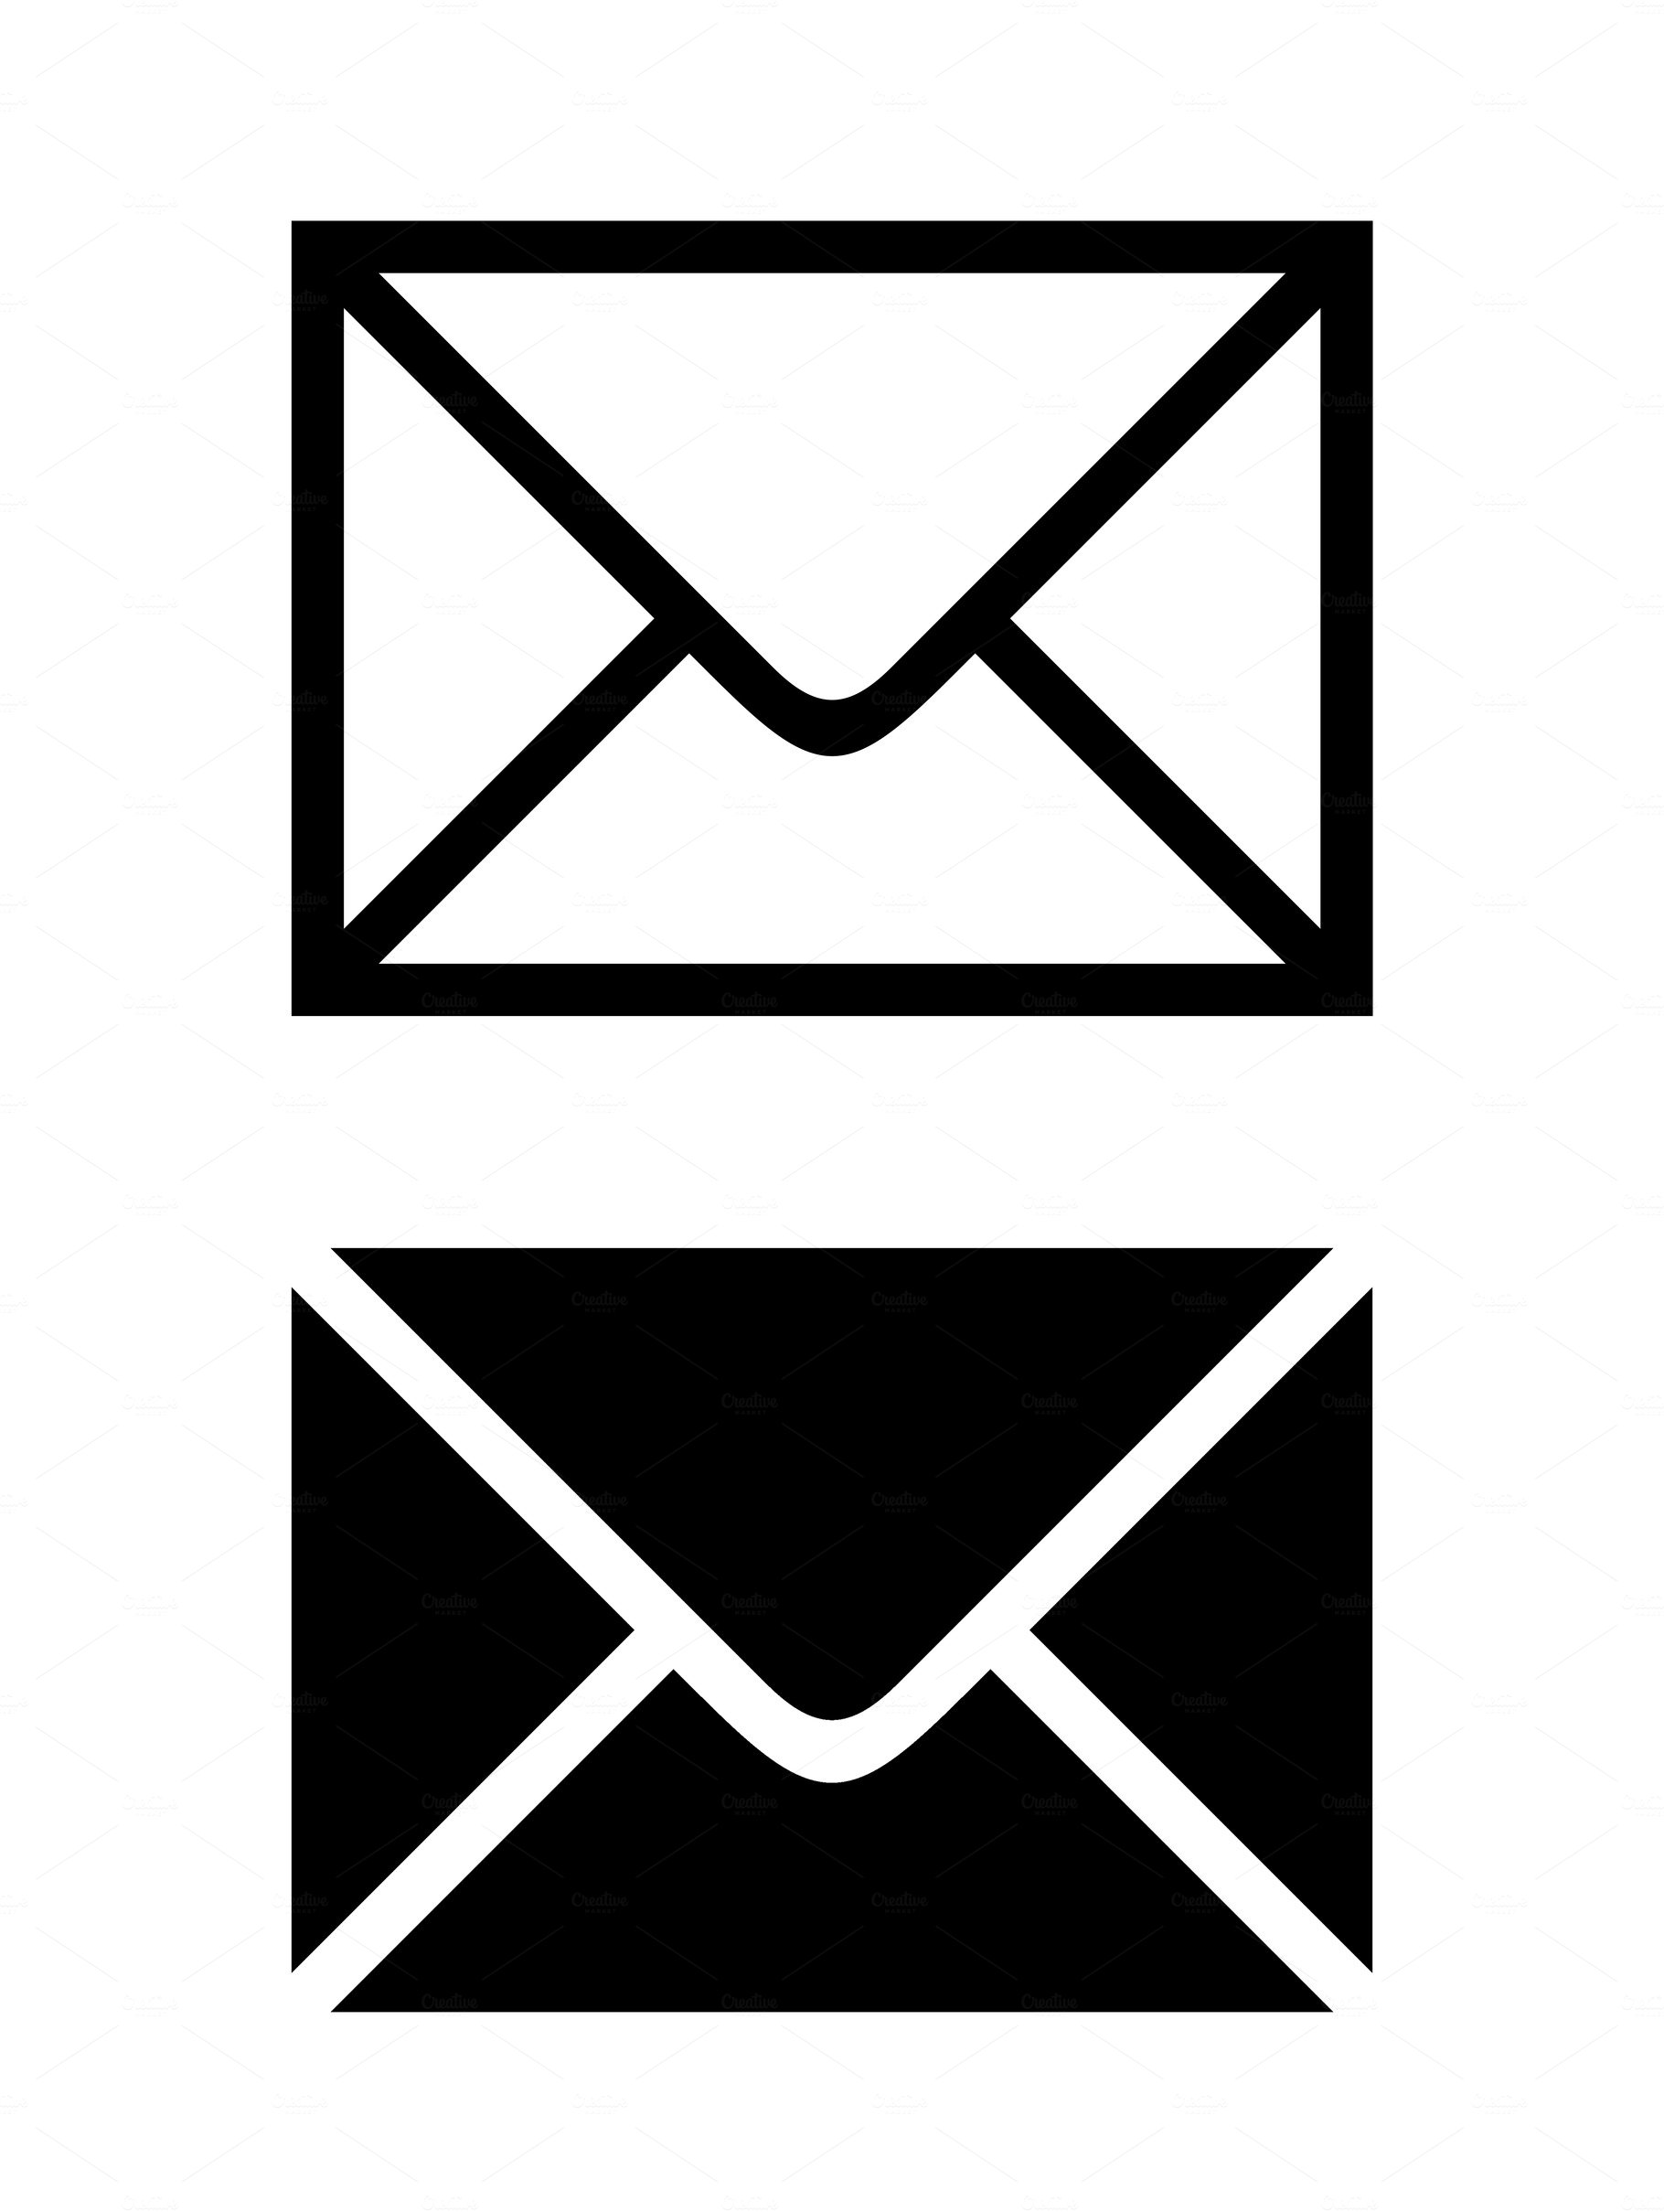 Envelope sign isolated on white. White and black mail icon. illustration cover image.